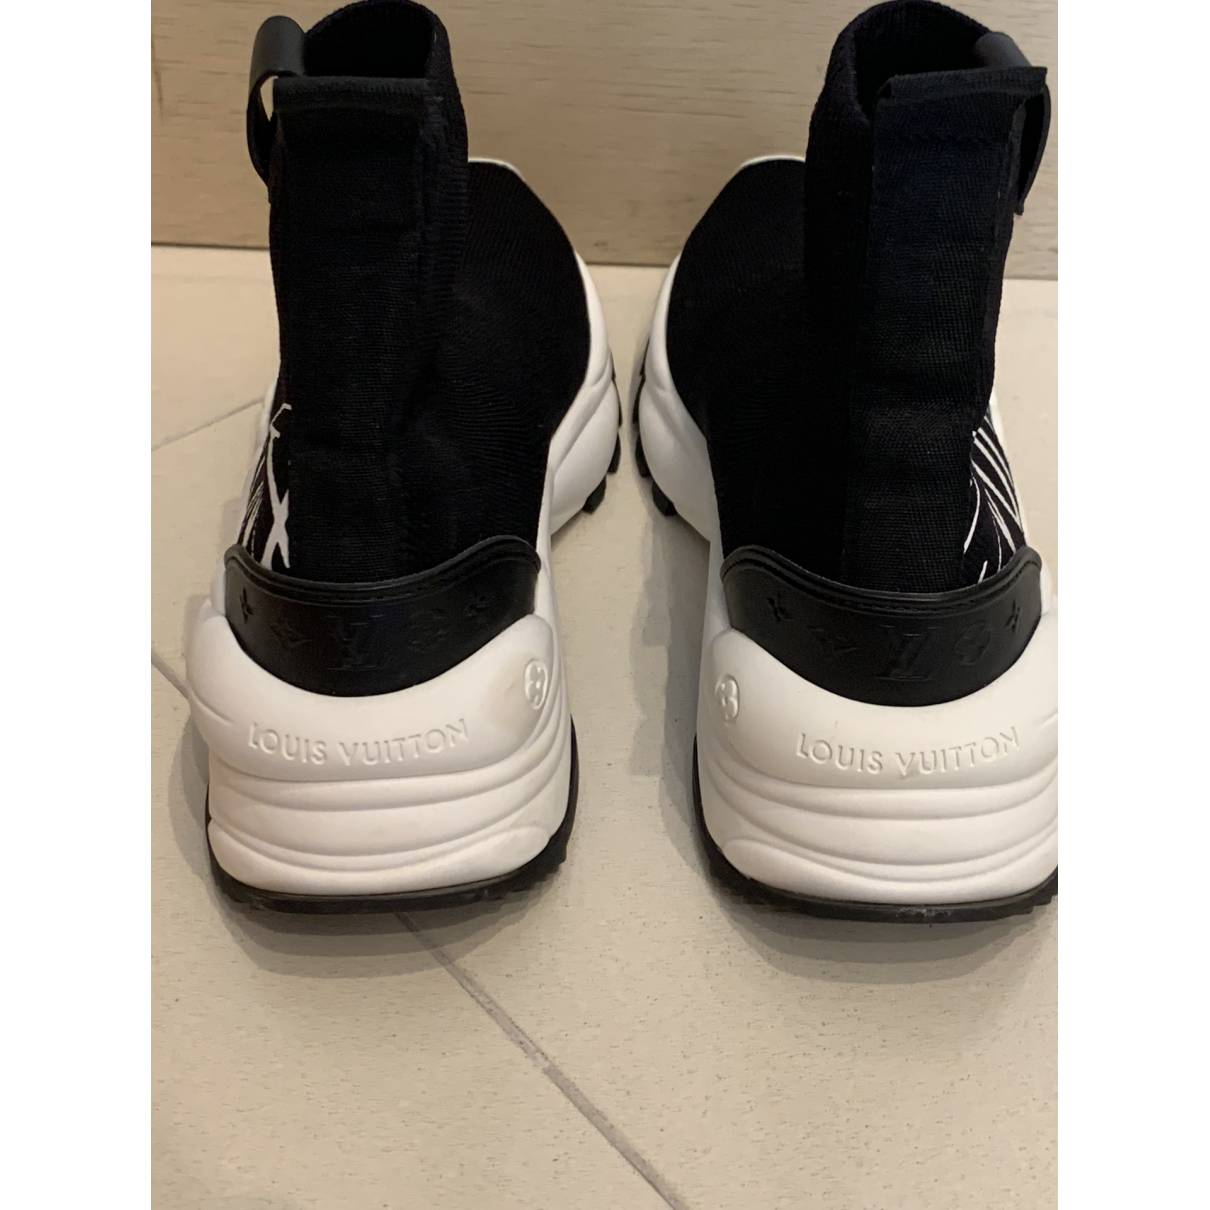 Louis Vuitton - Authenticated Run 55 Trainer - Cloth Black Plain for Women, Very Good Condition